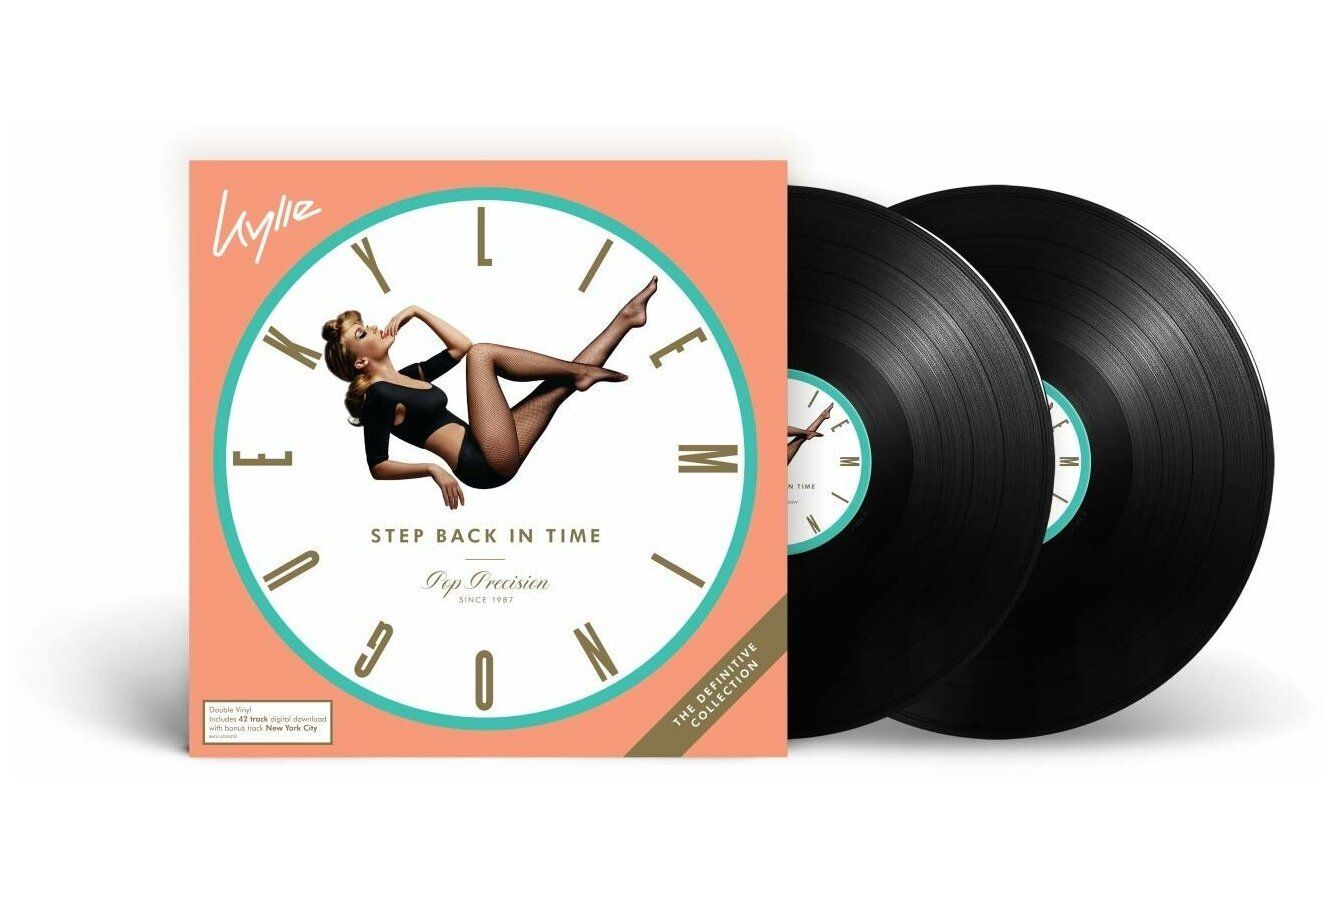 Виниловая Пластинка Minogue, Kylie Step Back In Time (The Definitive Collection) (4050538484212) виниловая пластинка minogue kylie fever 0190296683039